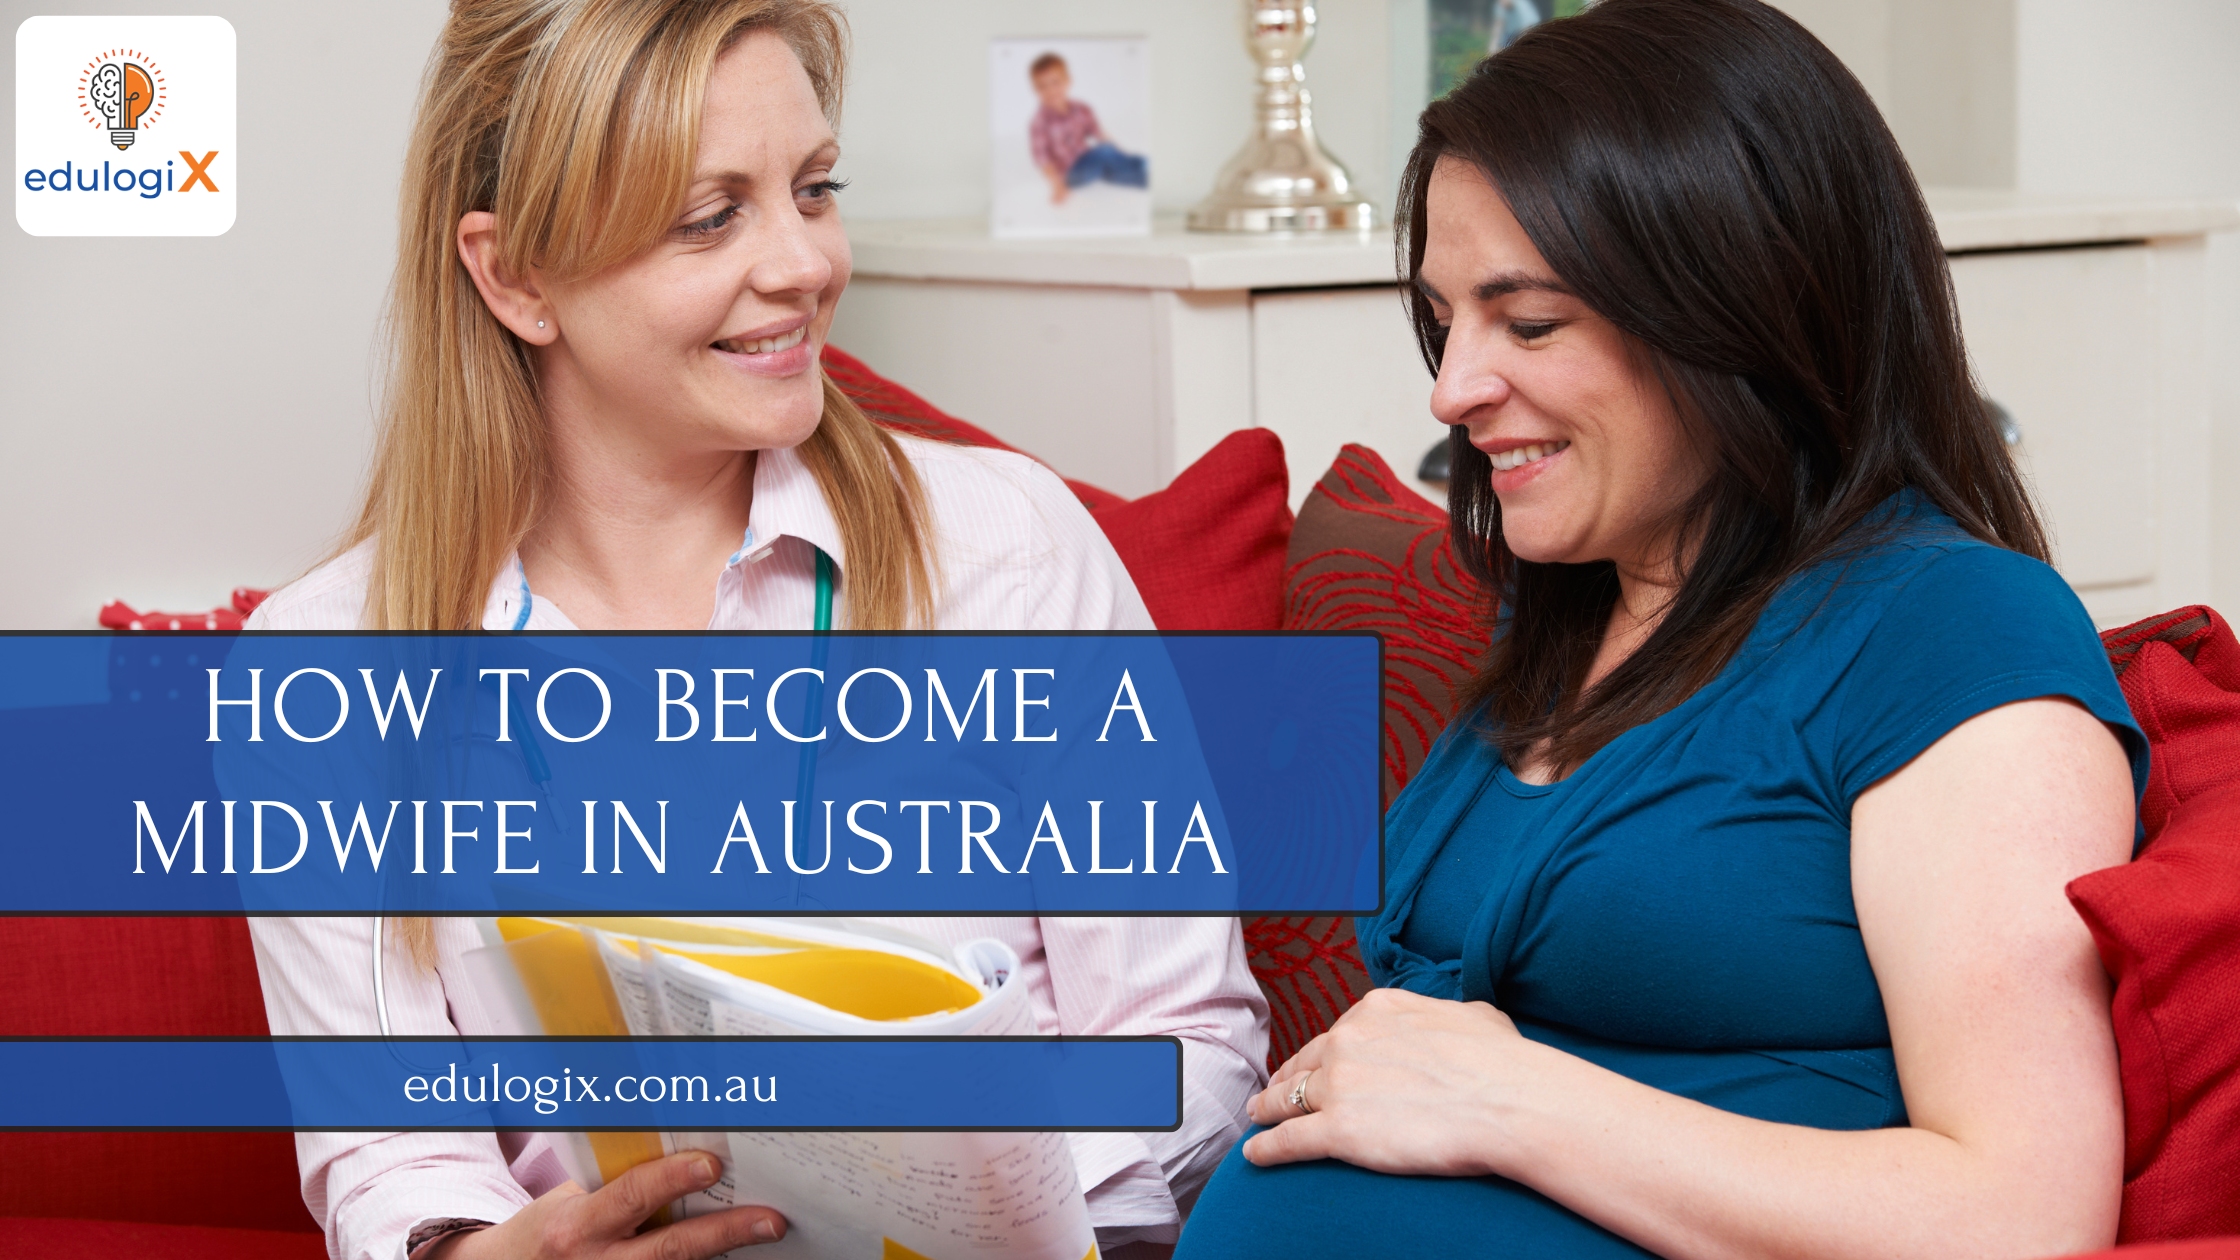 How to Become a Midwife in Australia